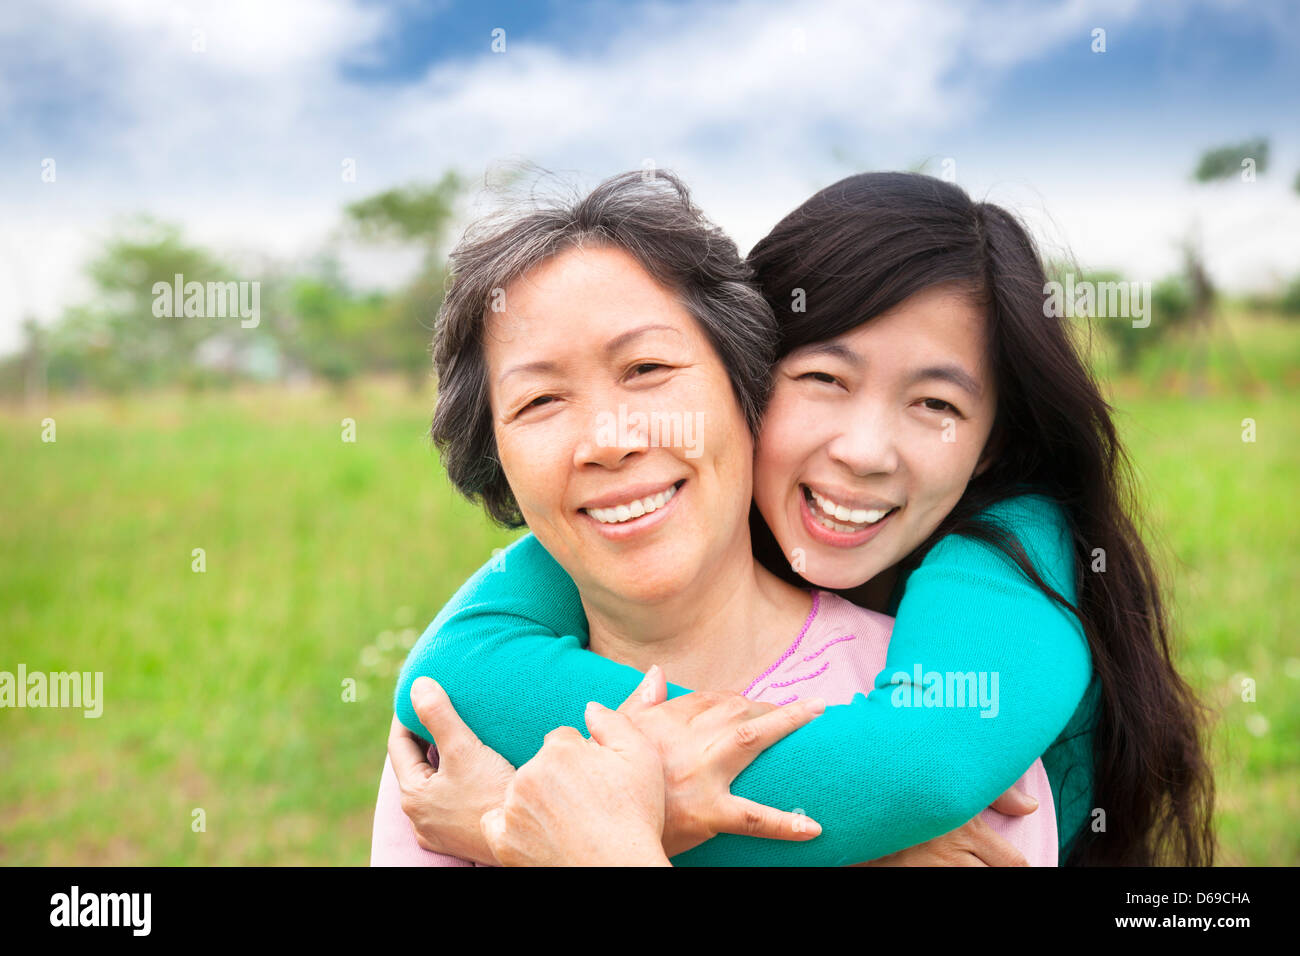 young woman hugging with her mother Stock Photo